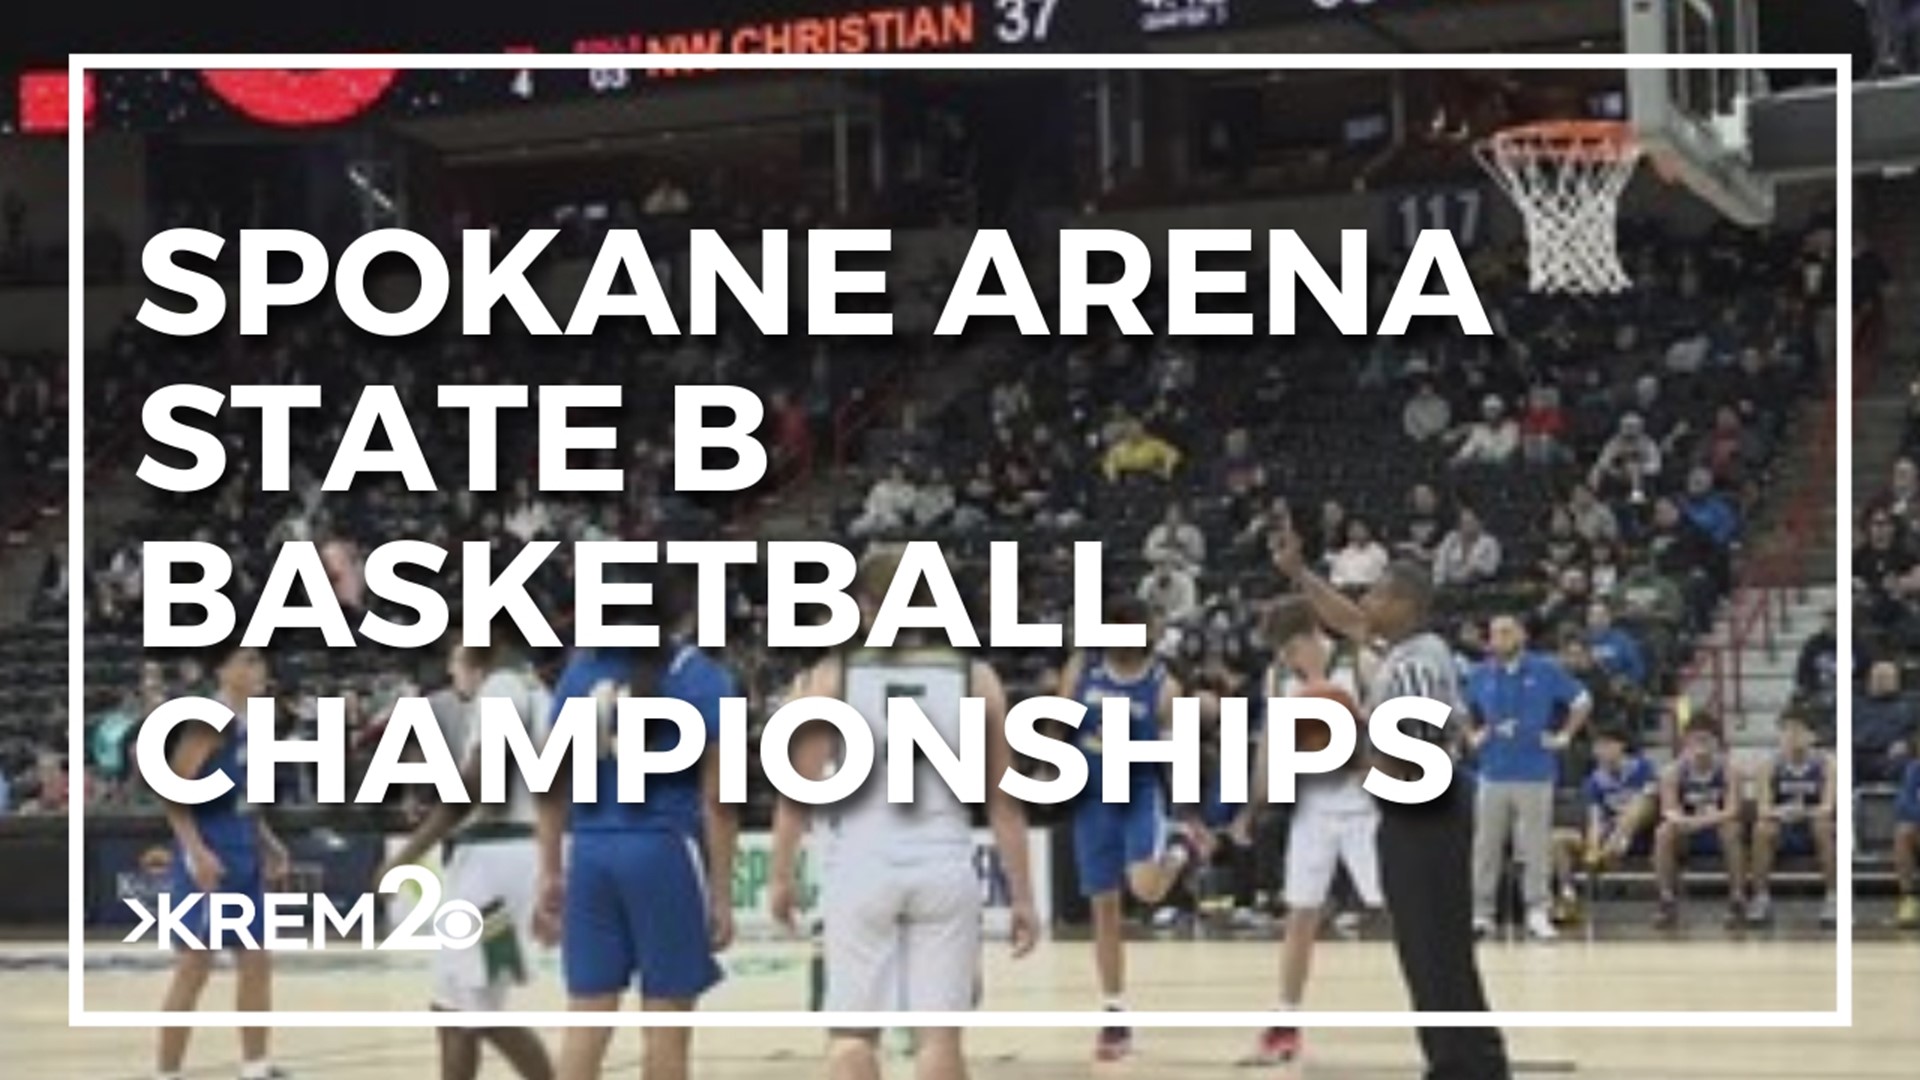 Many students from around Washington state gathered at the Spokane Arena for the tournament.